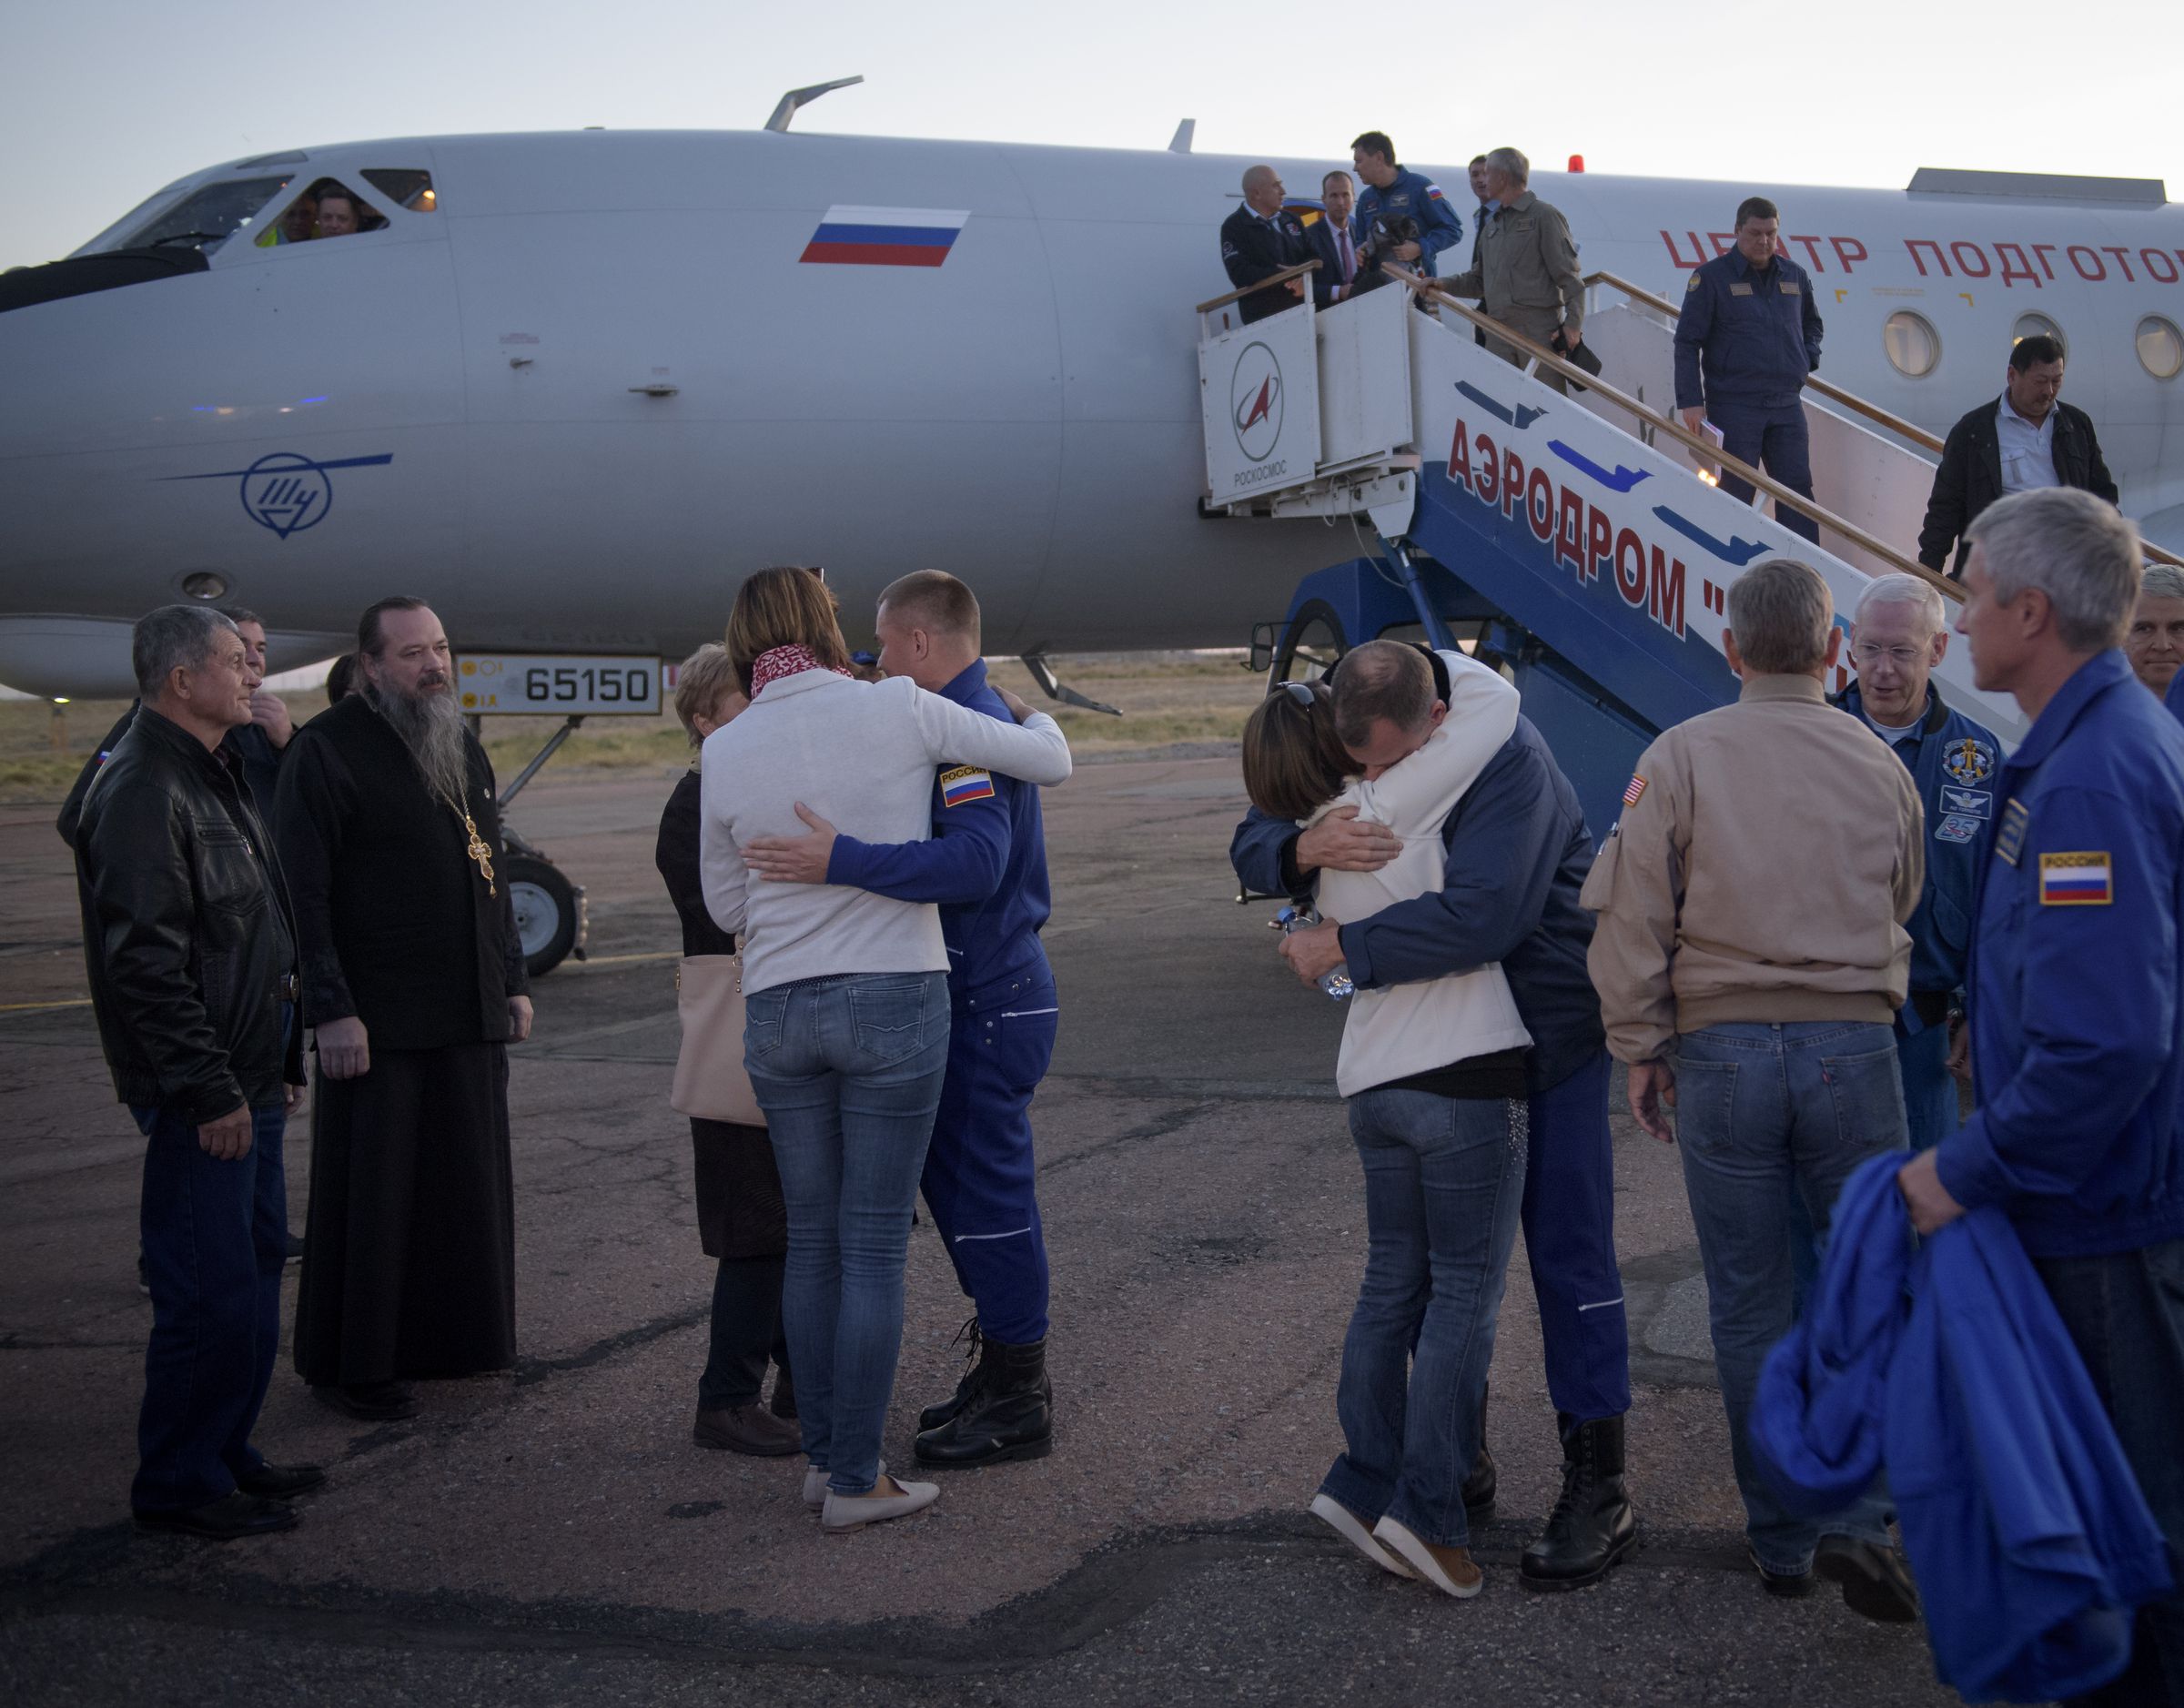 Hague and Ovchinin greeting their families after the failed launch.